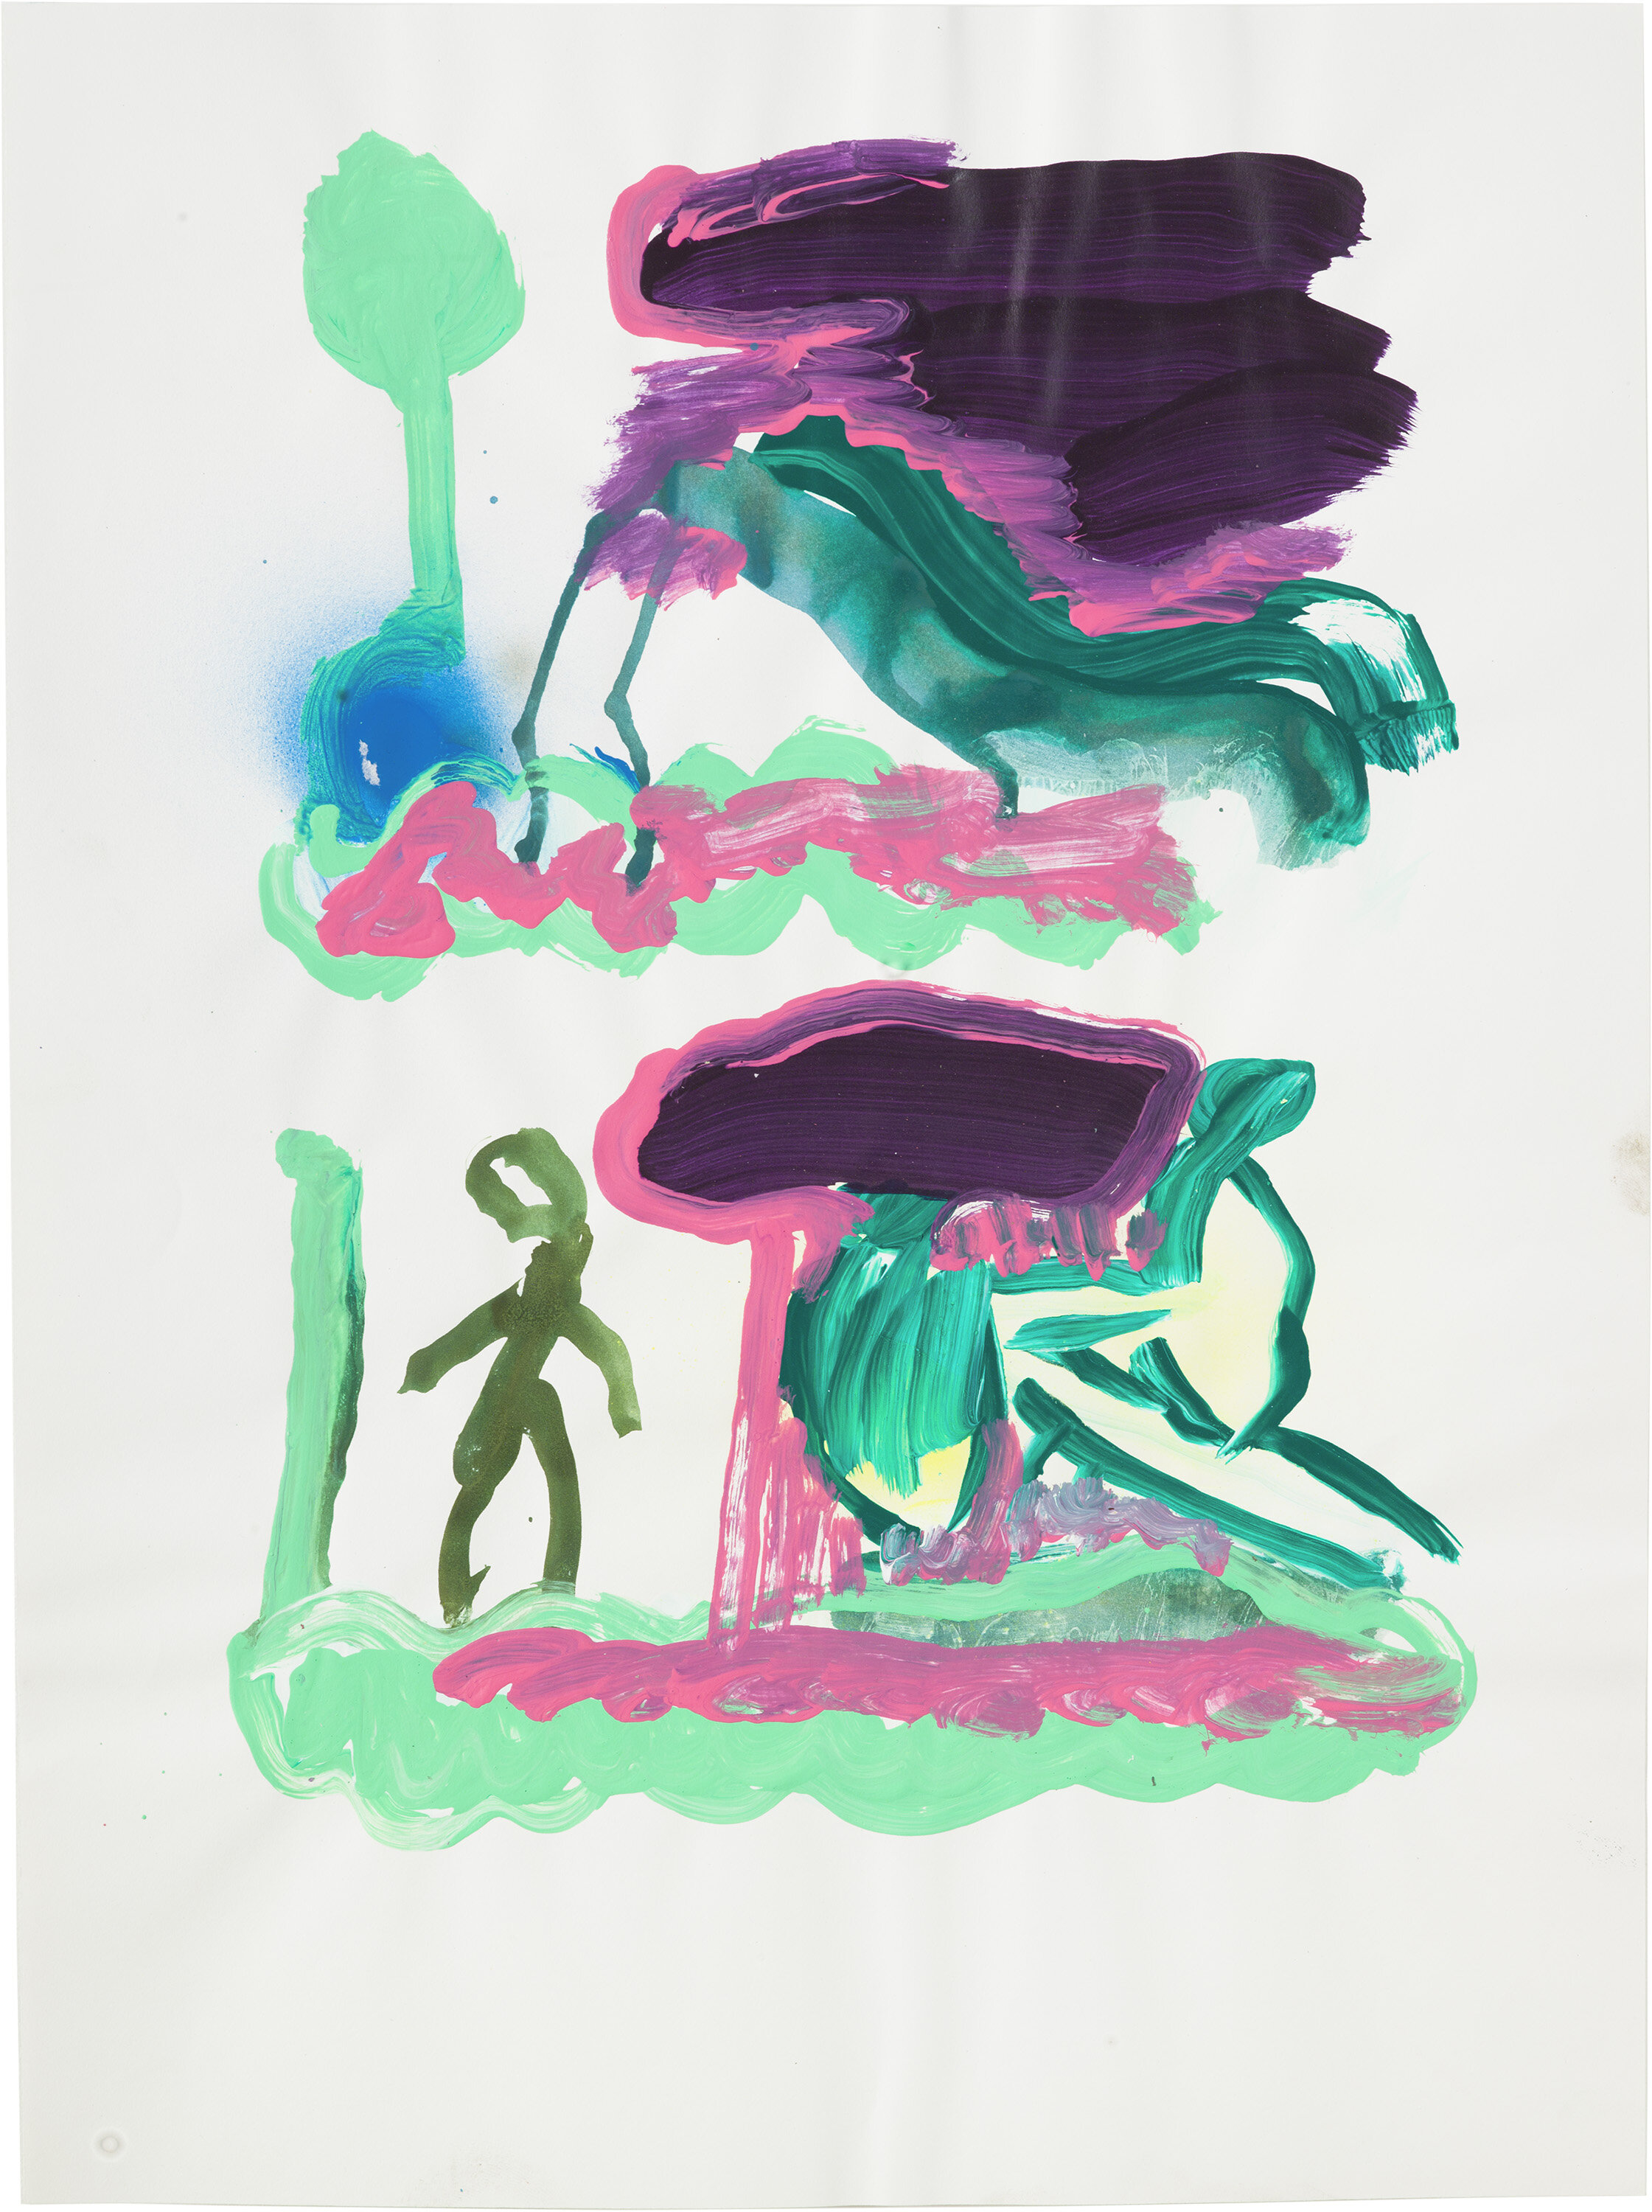  Drew Beattie and Ben Shepard   DBBS-DRW-2015-137   2015  acrylic and spray paint on paper  24 x 18 inches 